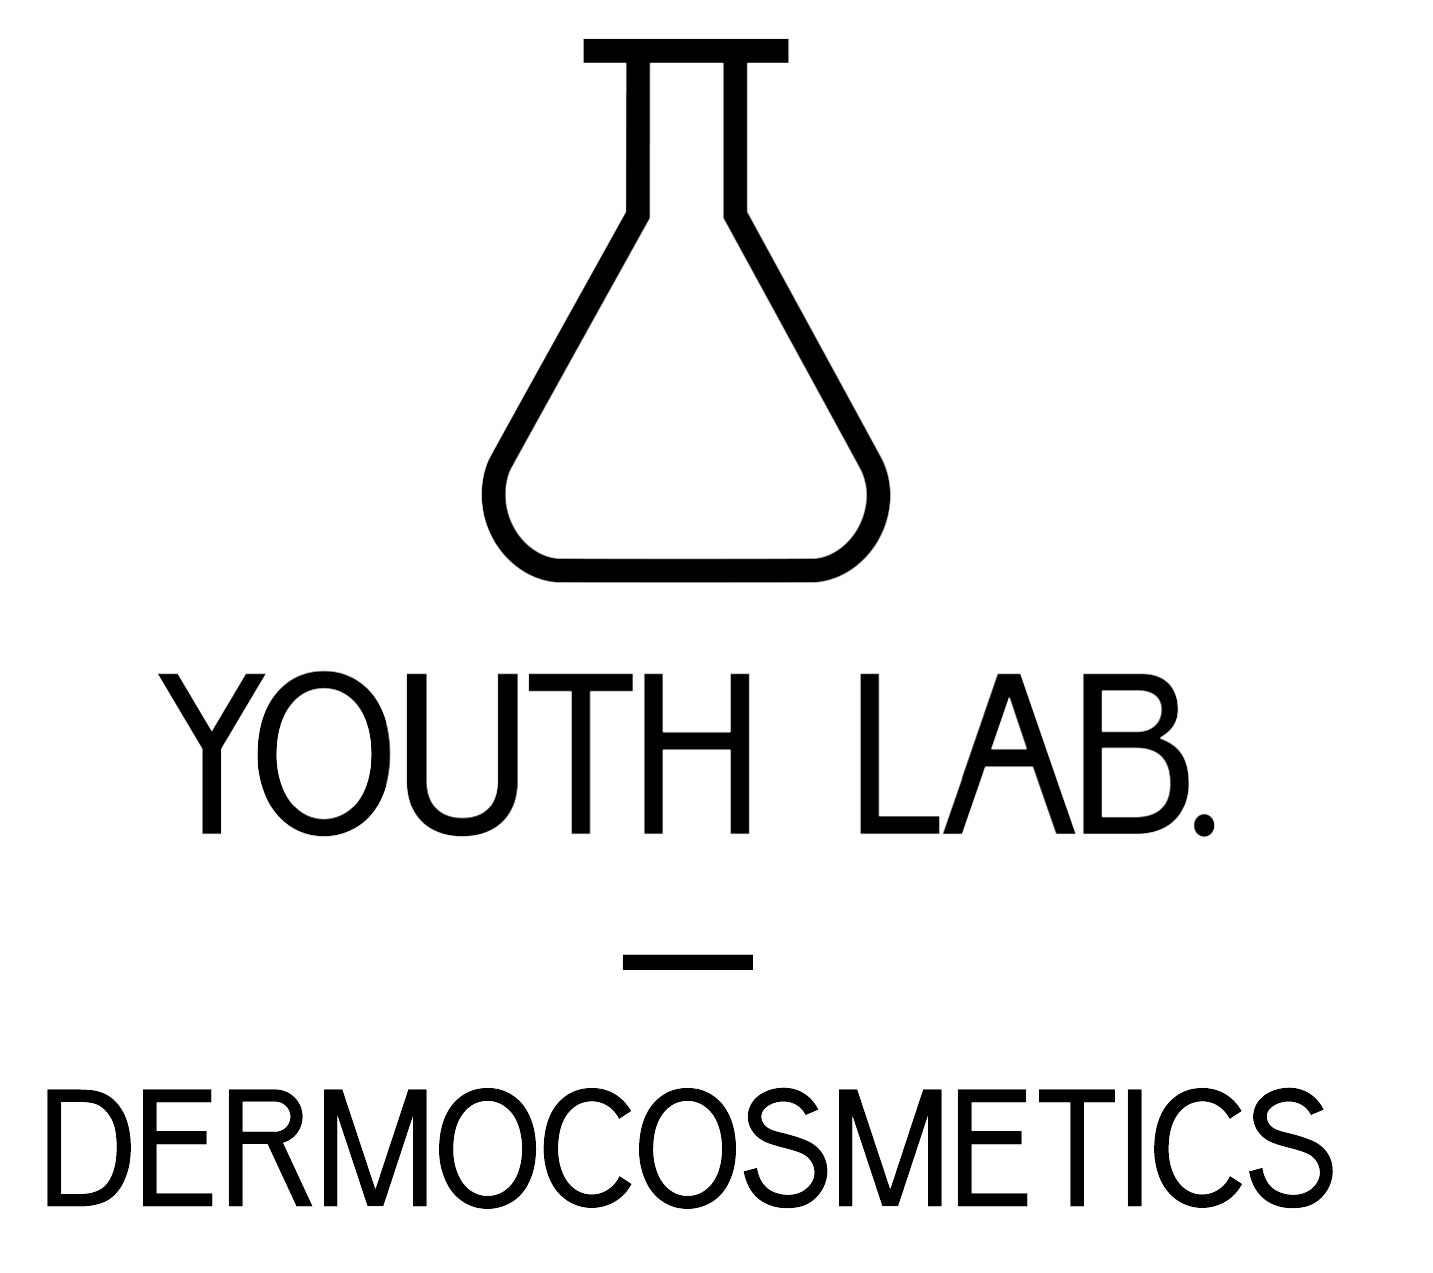 YOUTHLAB